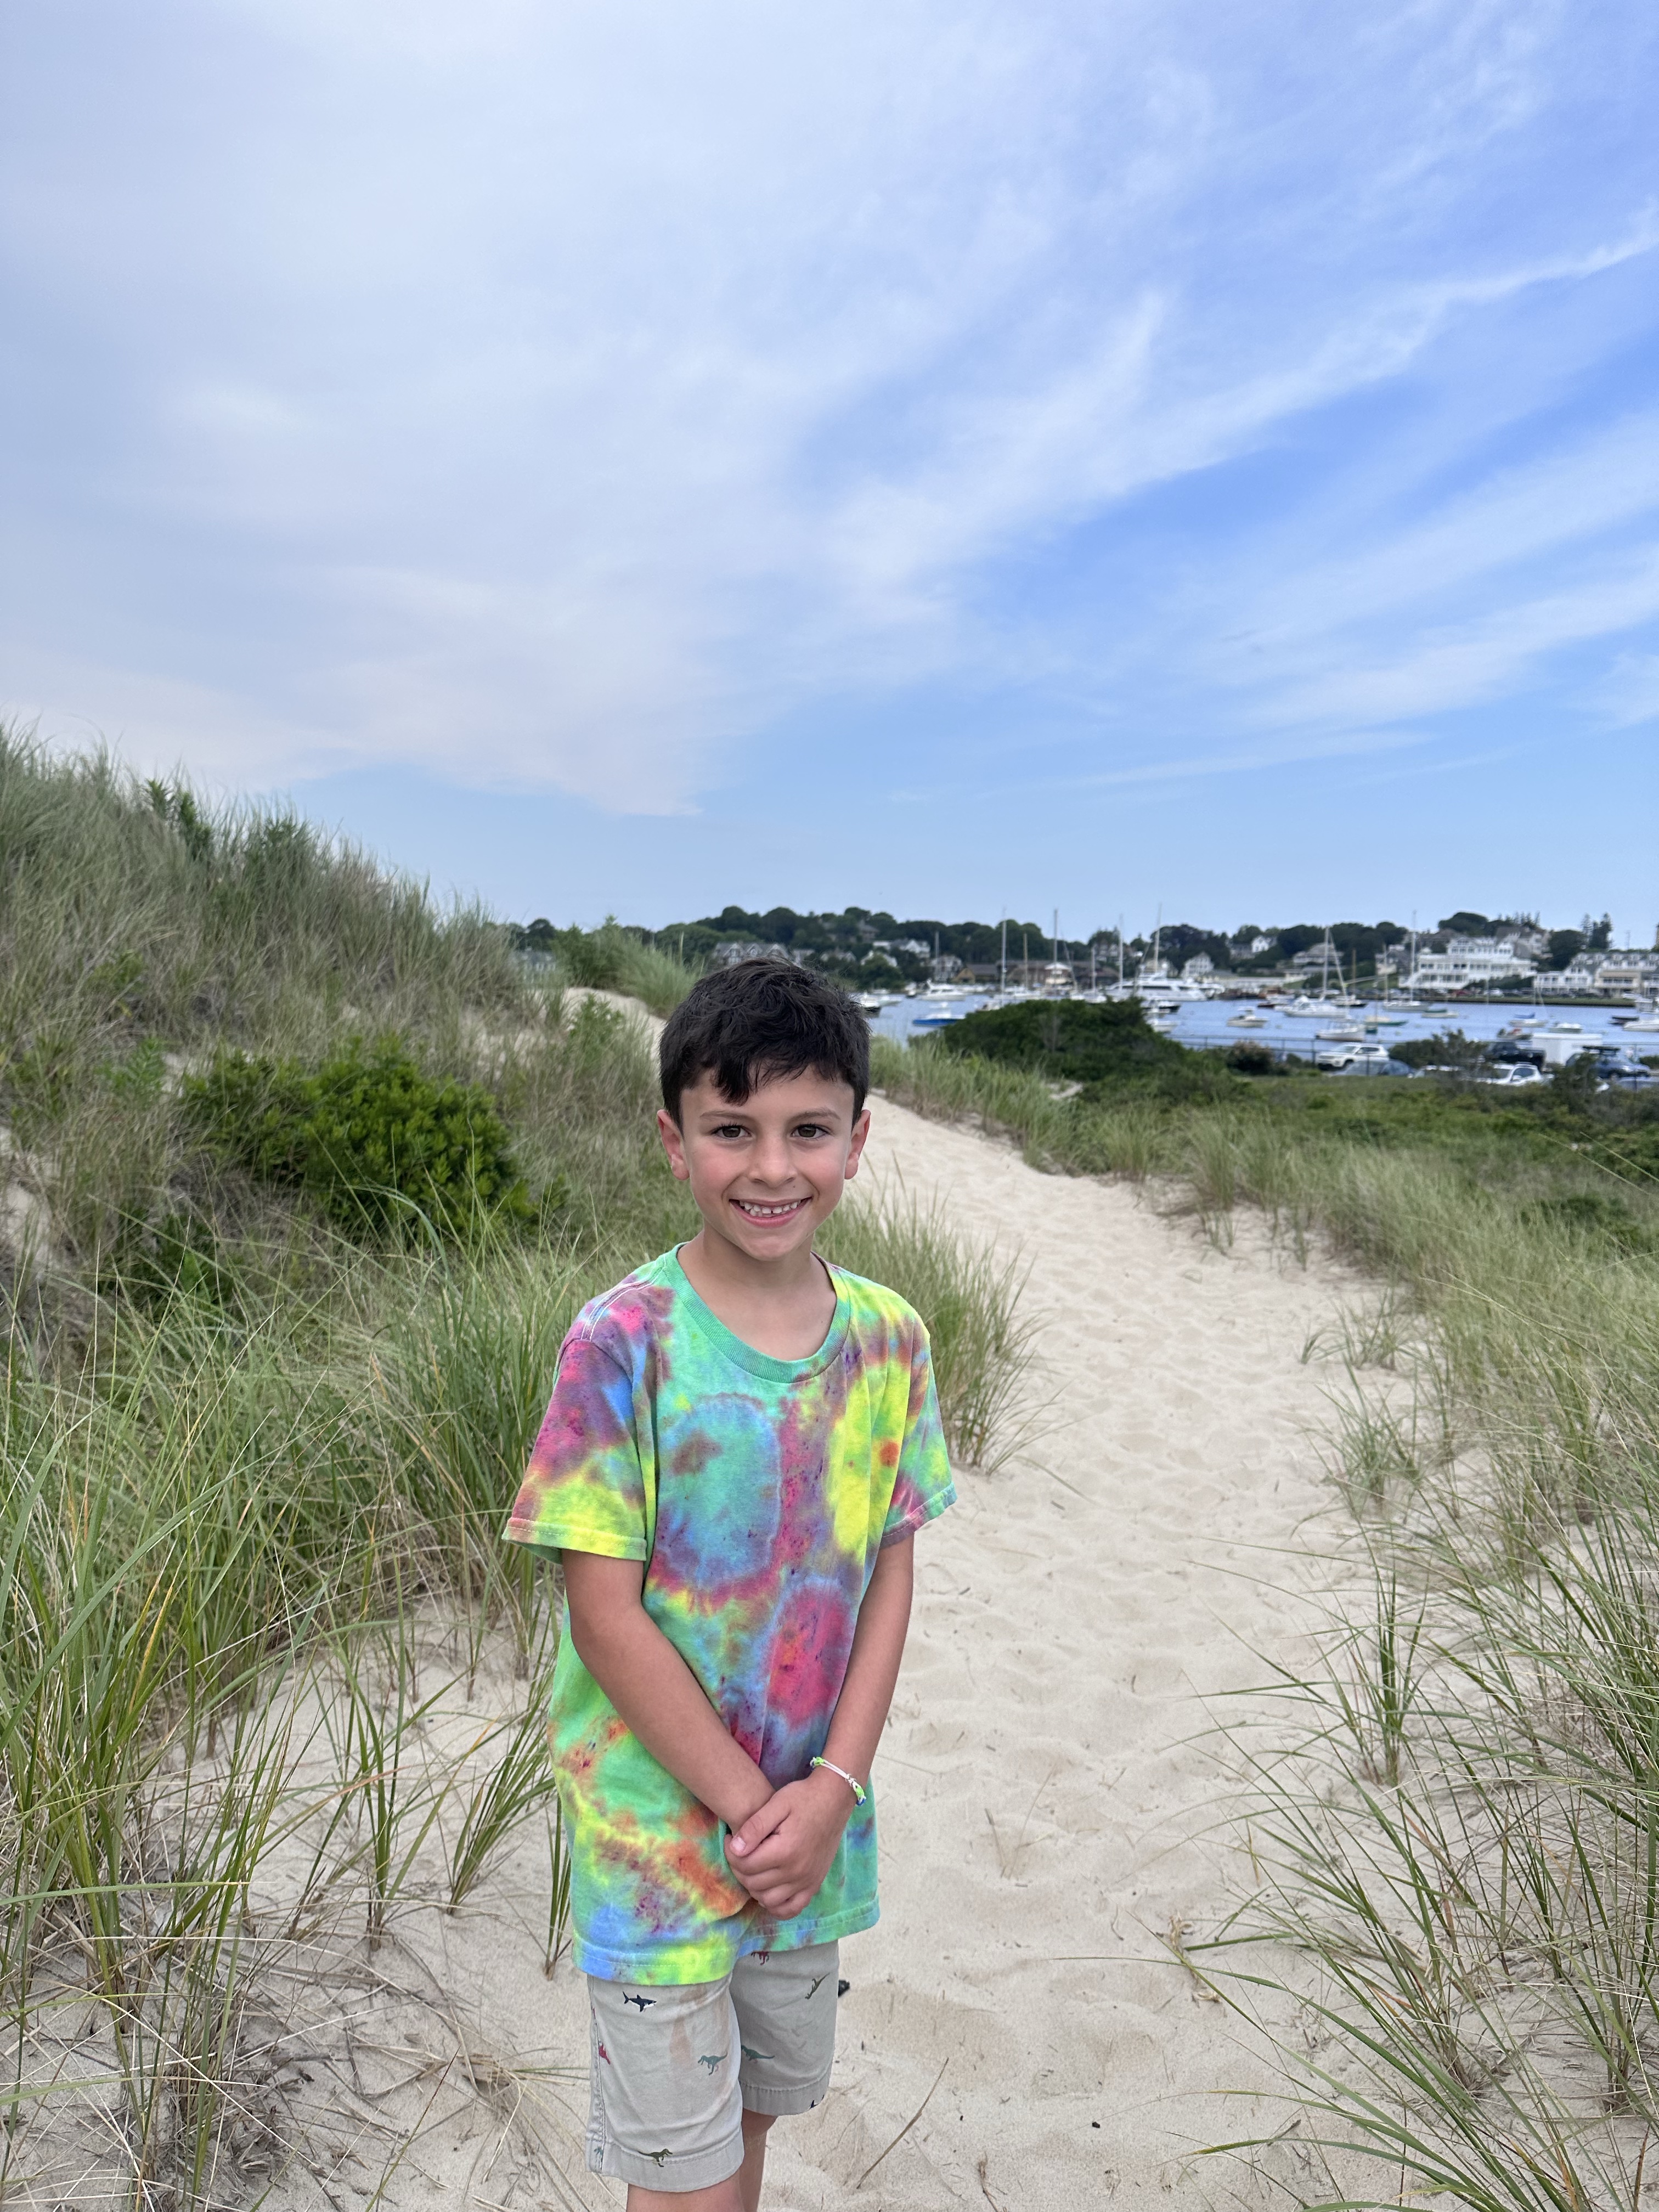 Napatree Beach In Westerly, Rhode Island with kids